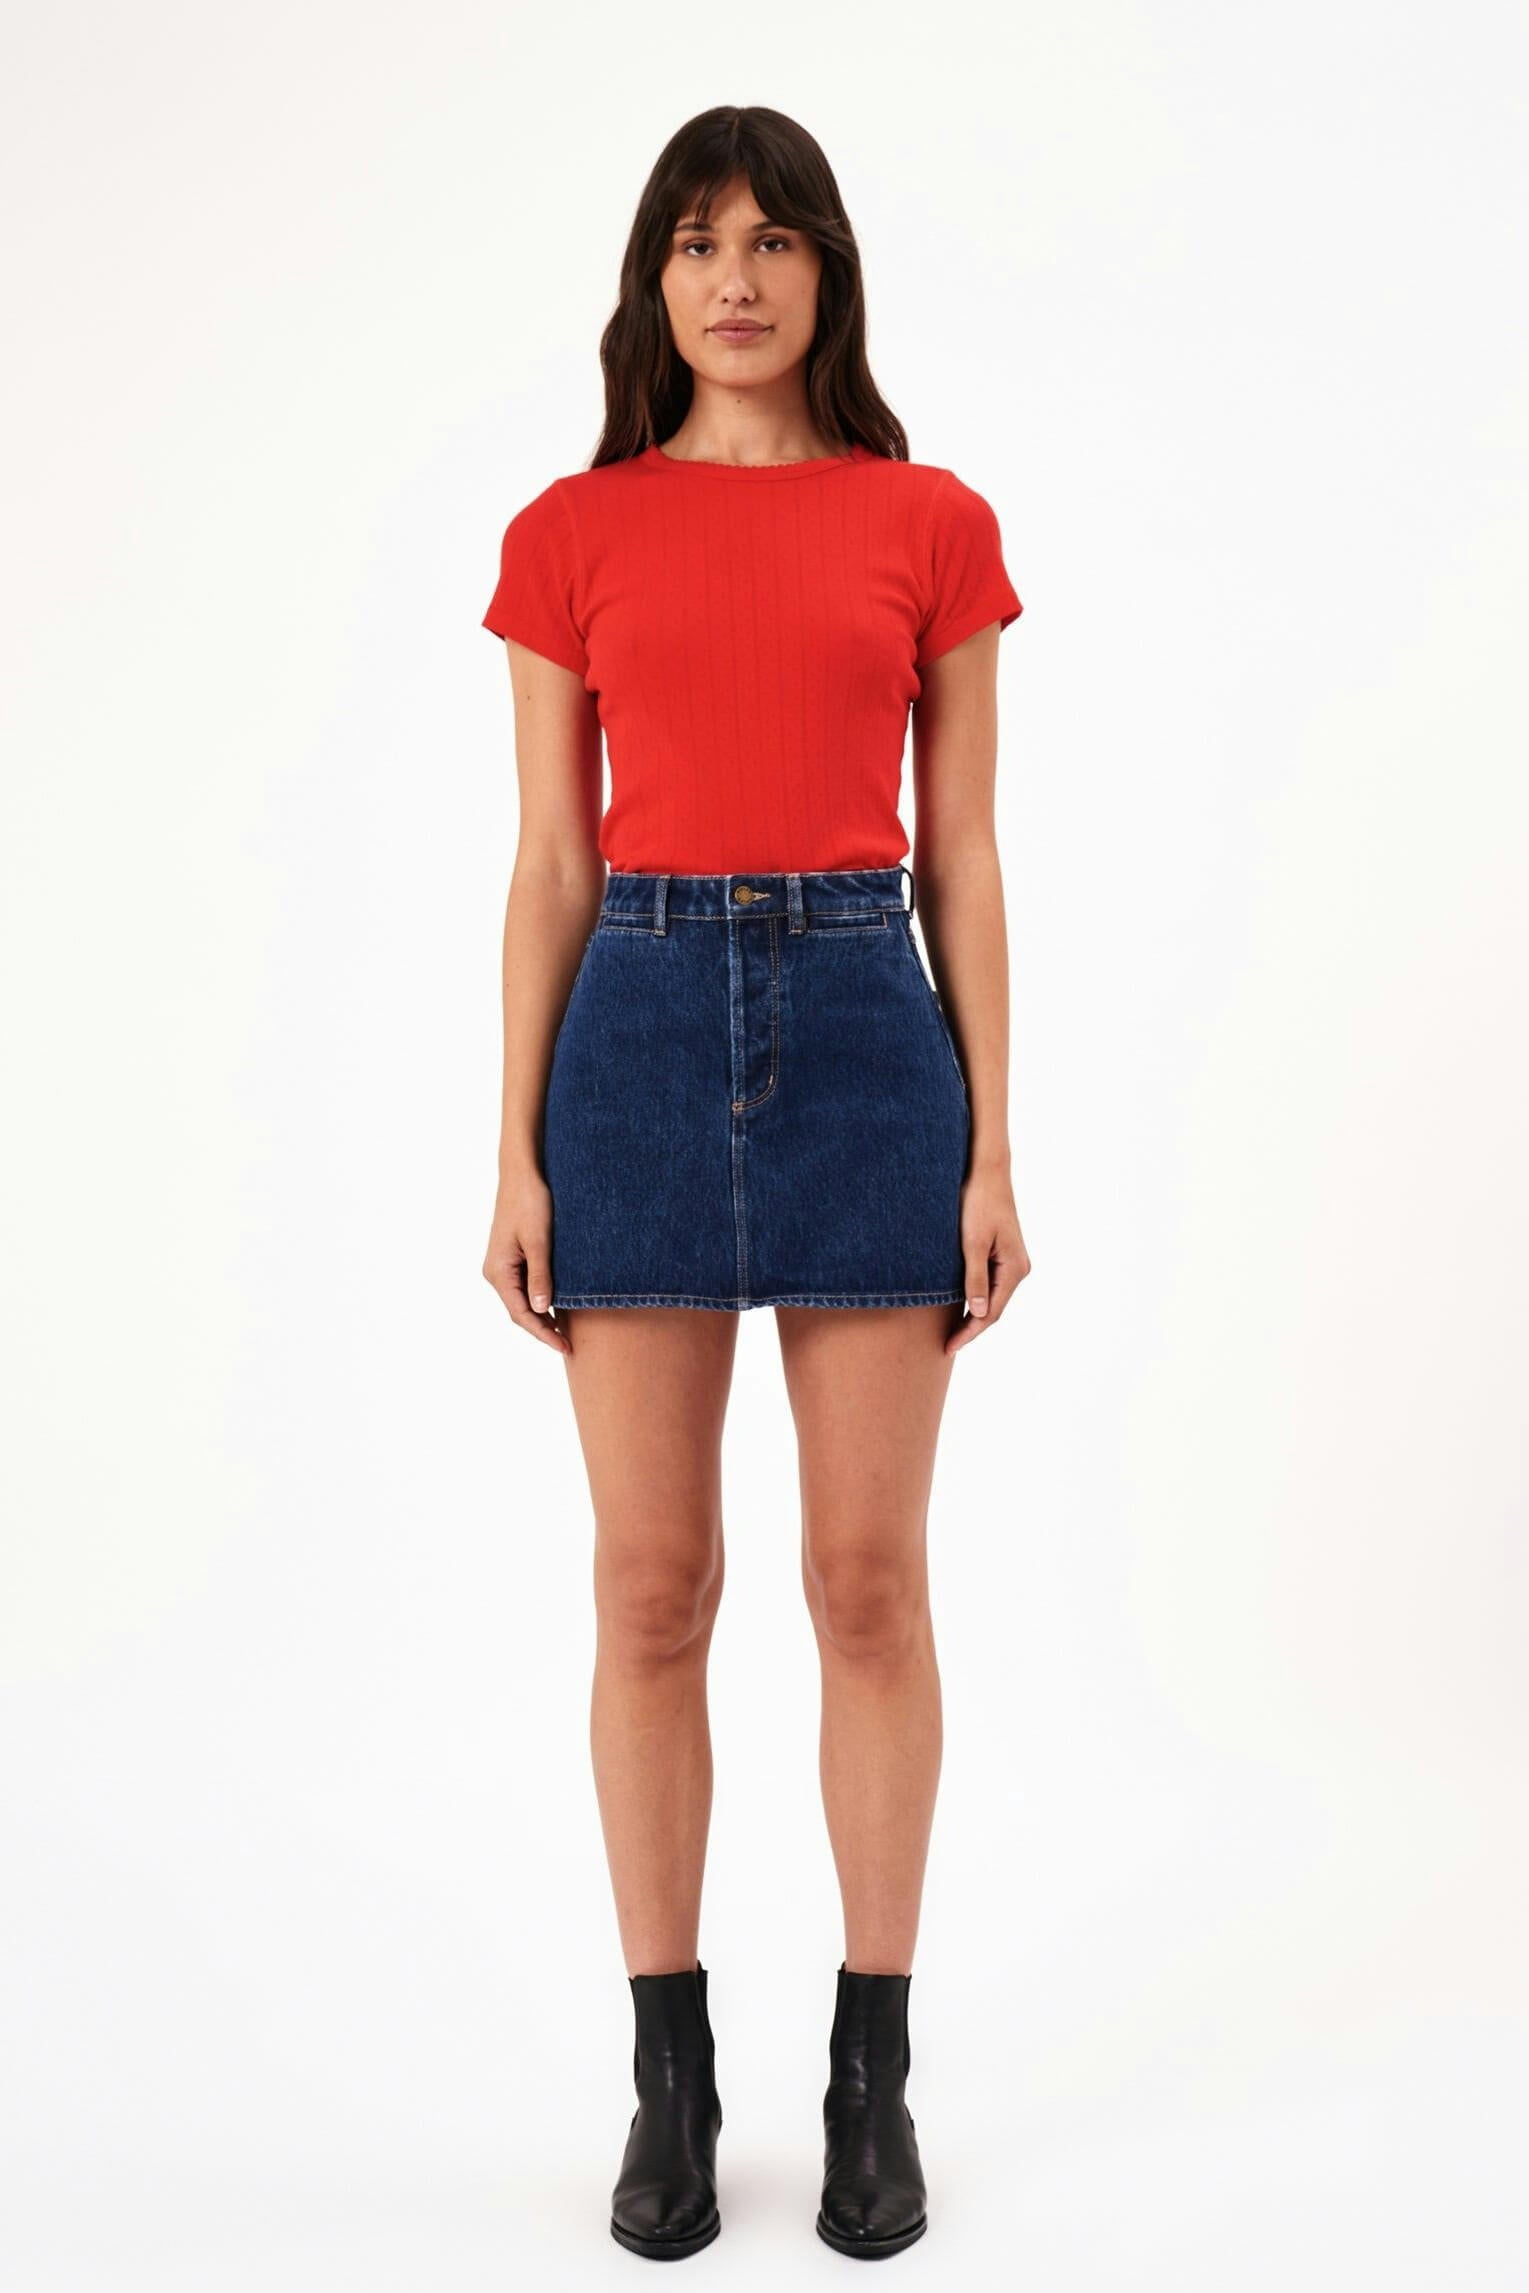 Rollas Jeans classic mini skirt in stone